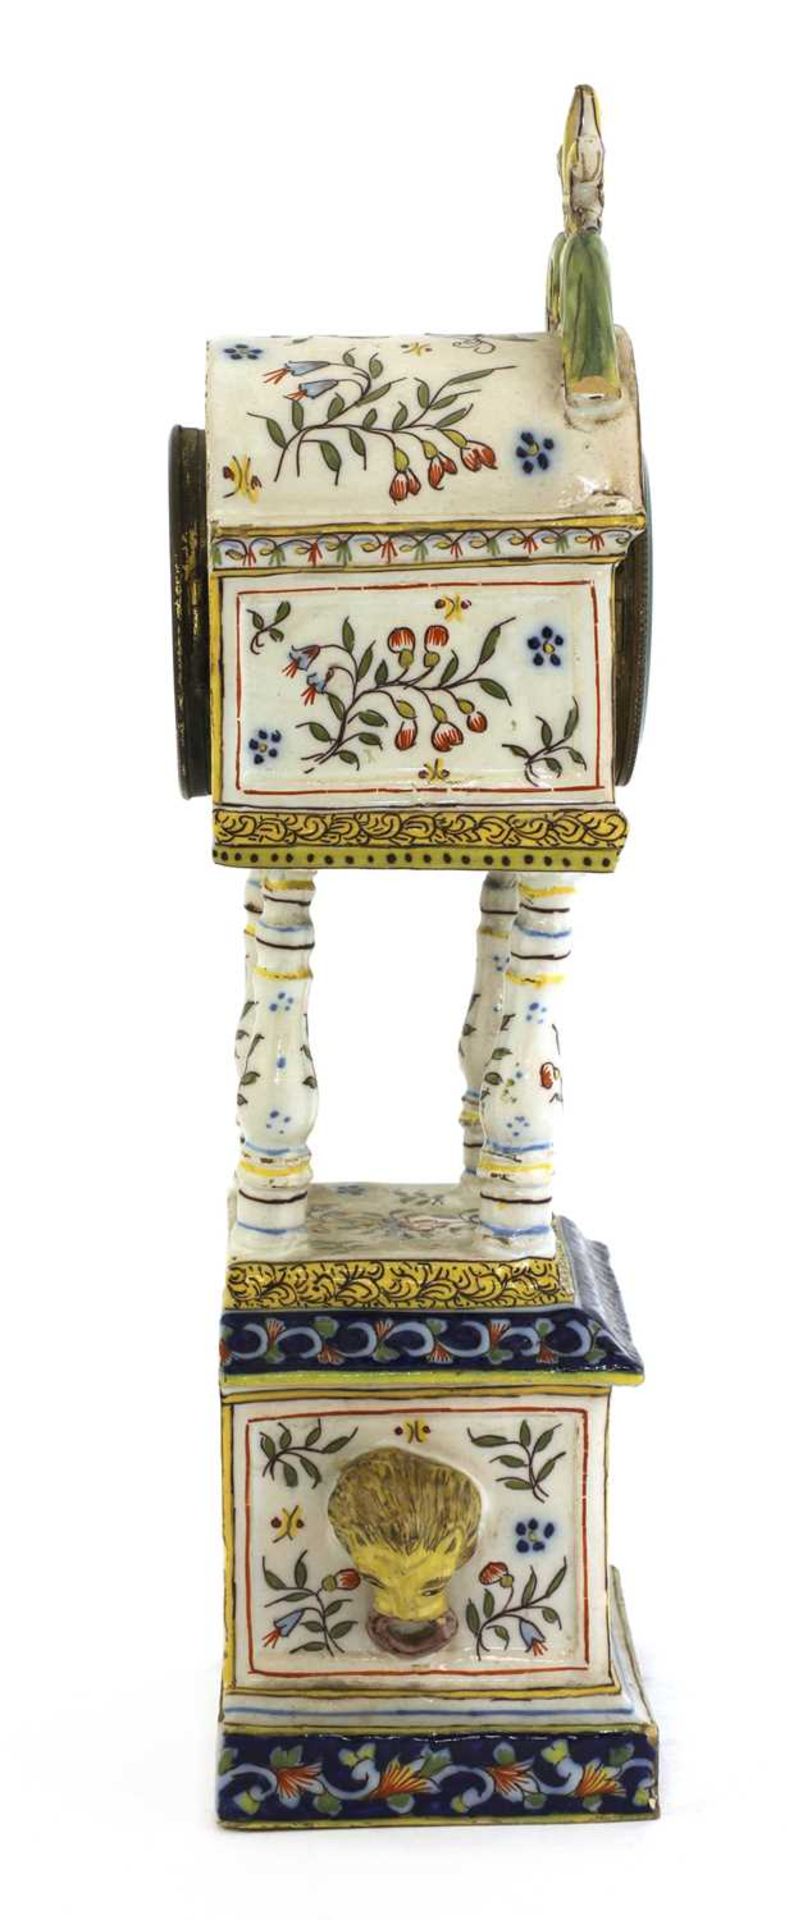 A French faience table clock, - Image 2 of 5